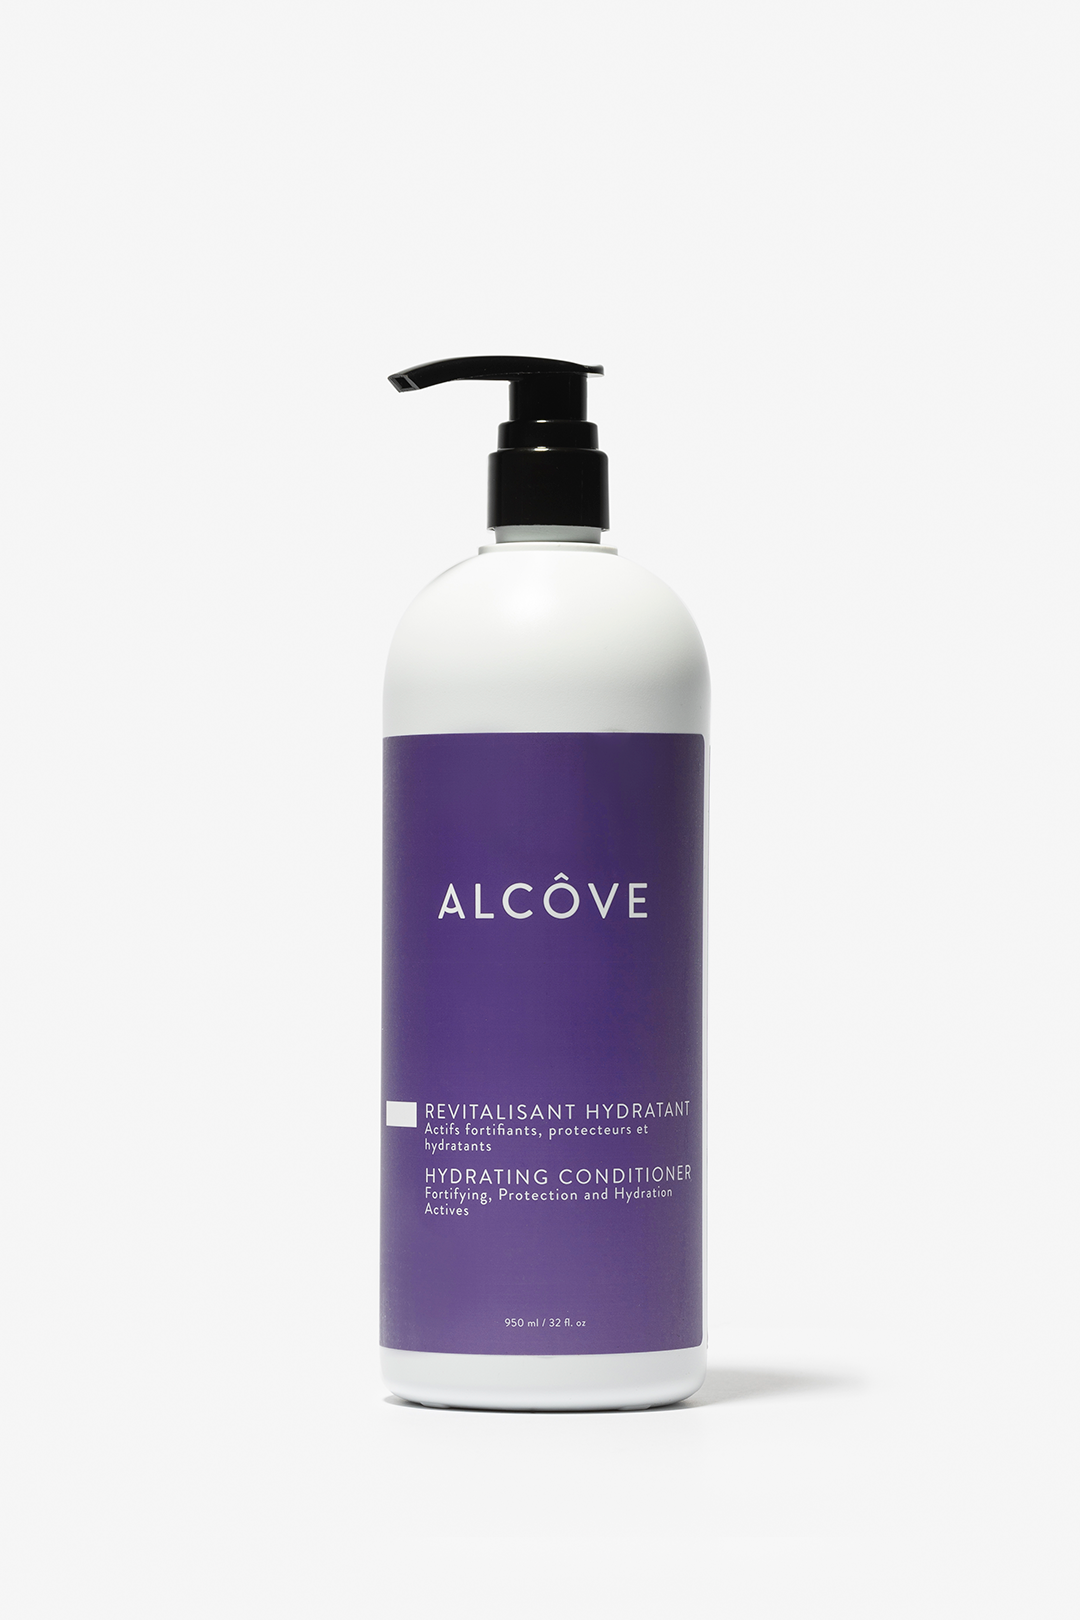 Alcove - HYDRATING CONDITIONER - by Alcove |ProCare Outlet|